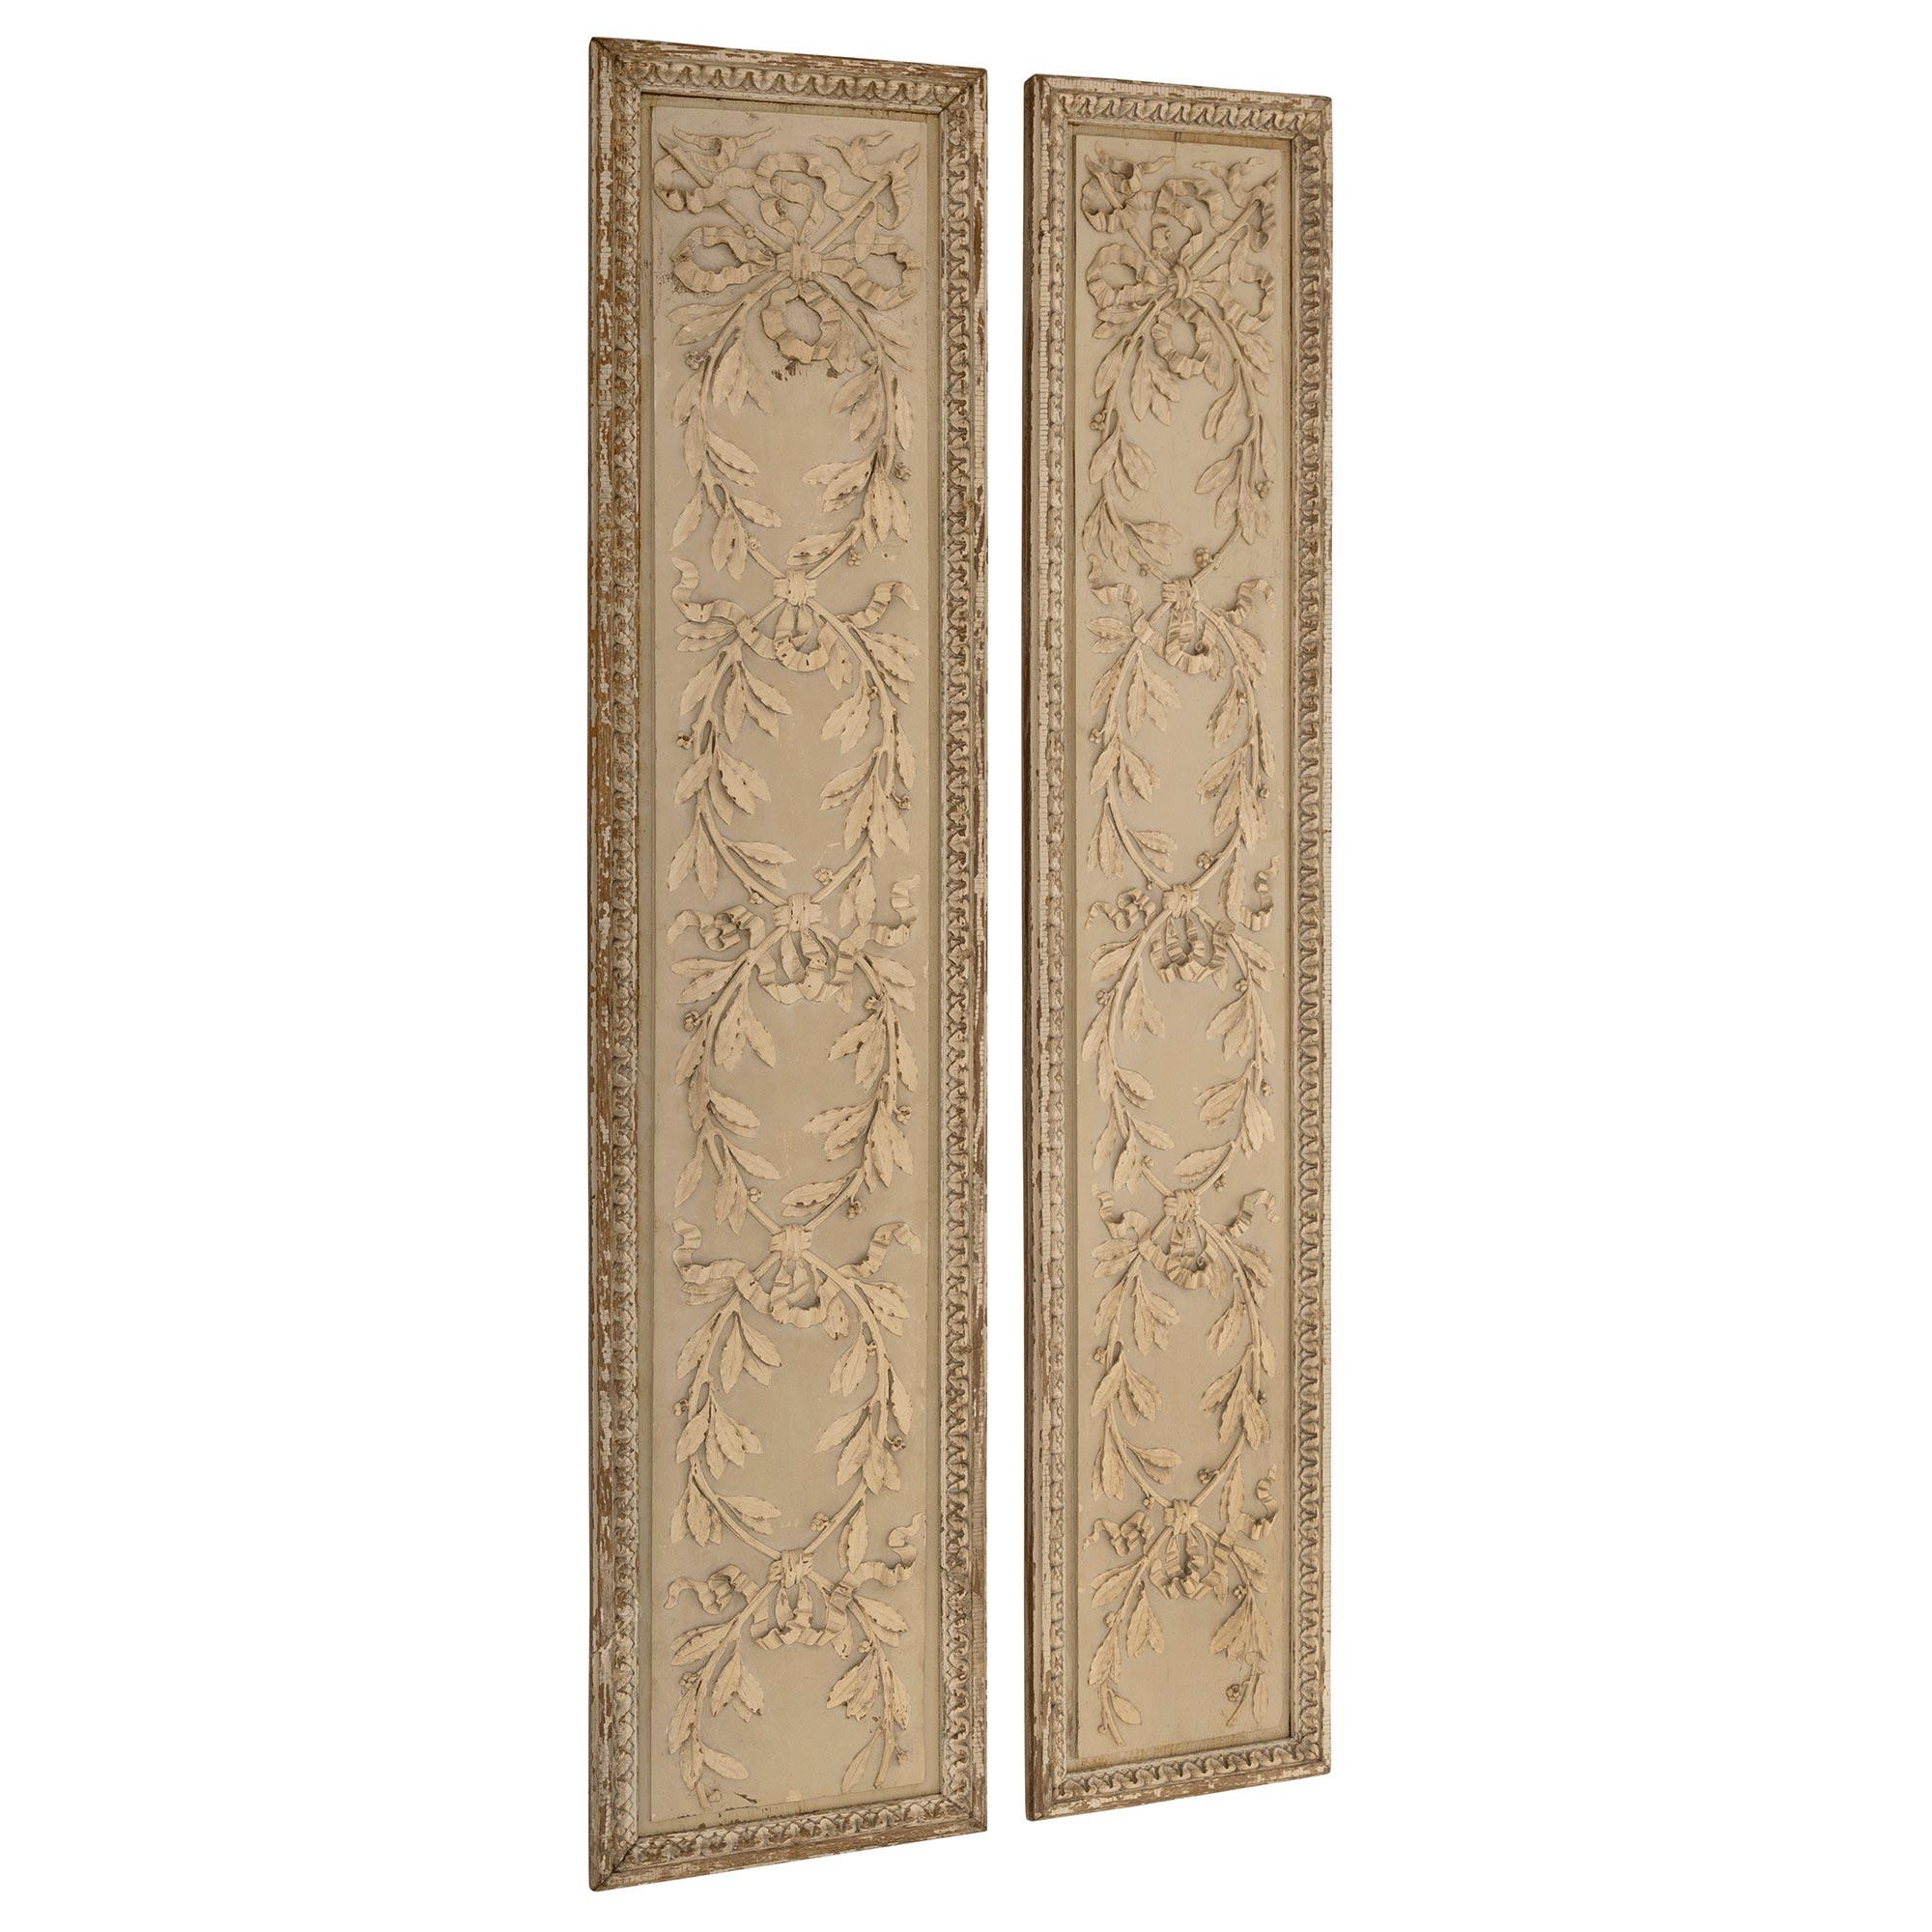 A striking pair of French 19th century Louis XVI st. patinated wall decor panels. Each panel displays beautiful finely detailed intertwining berried laurel branches tied with charming tied ribbons and bows with a most decorative mottled foliate wrap